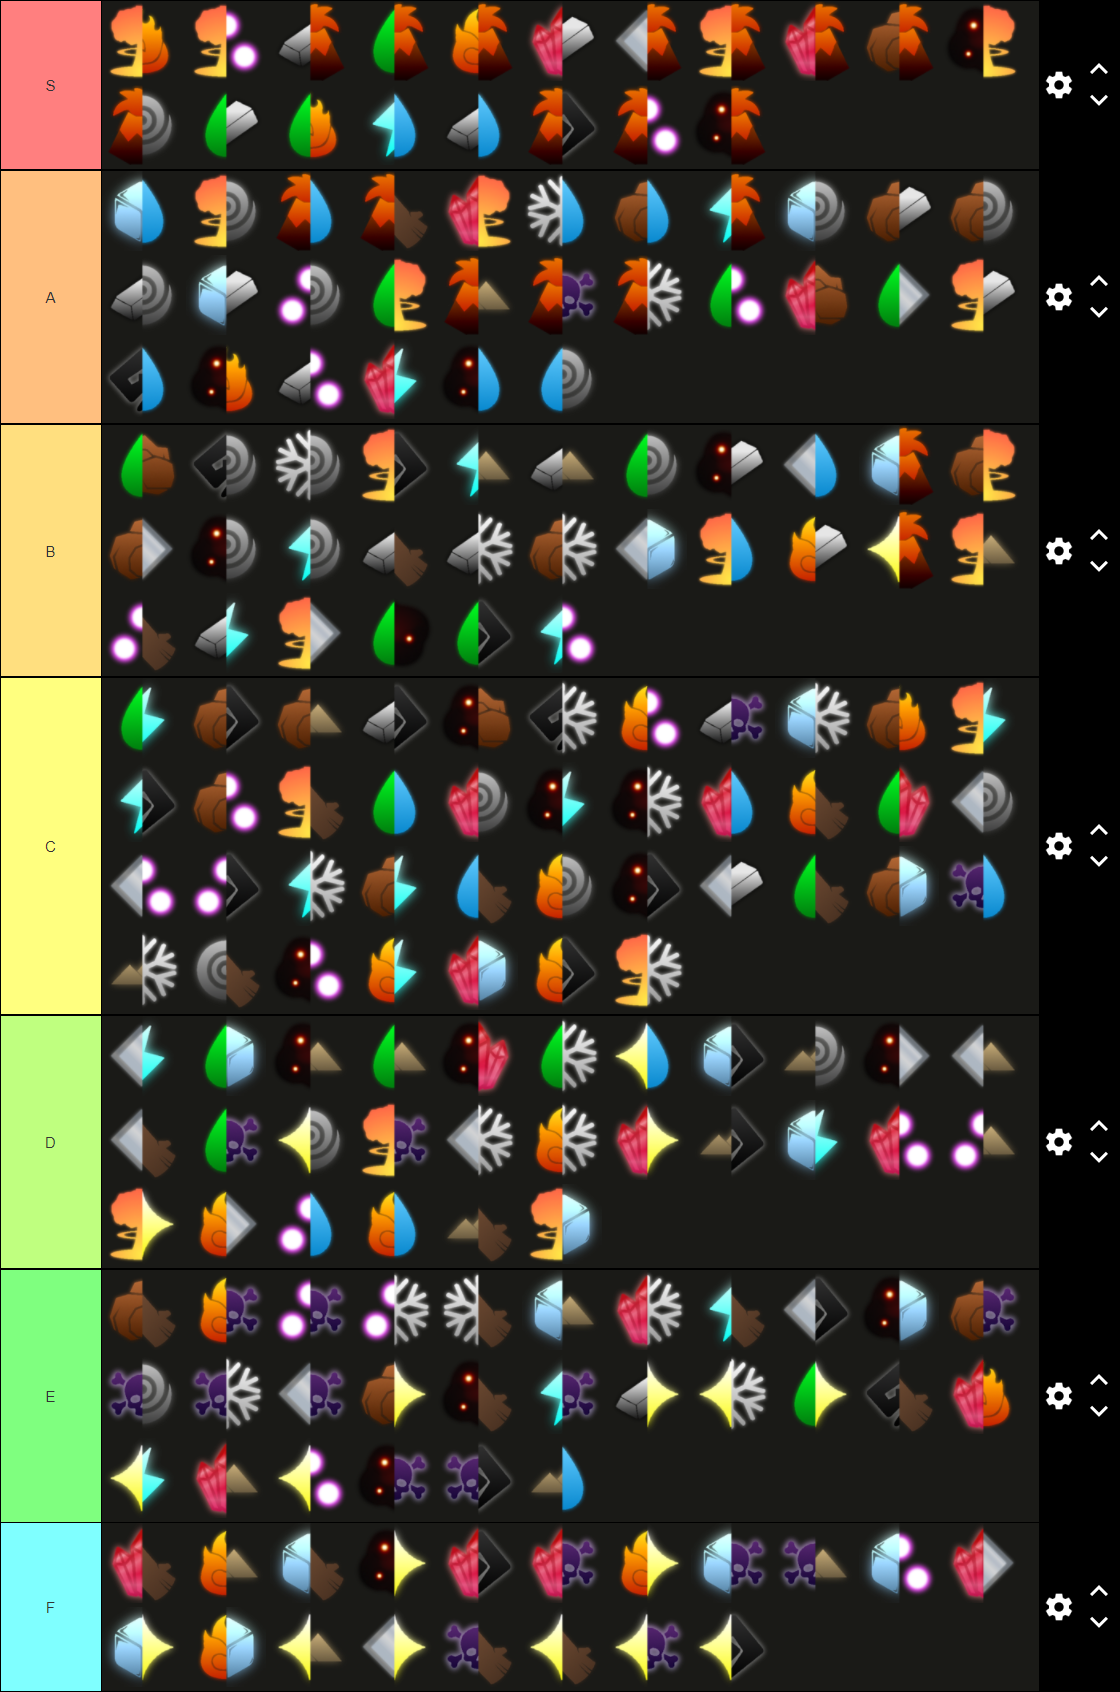 Magic Tier List based on magic's looks, effects, details, etc